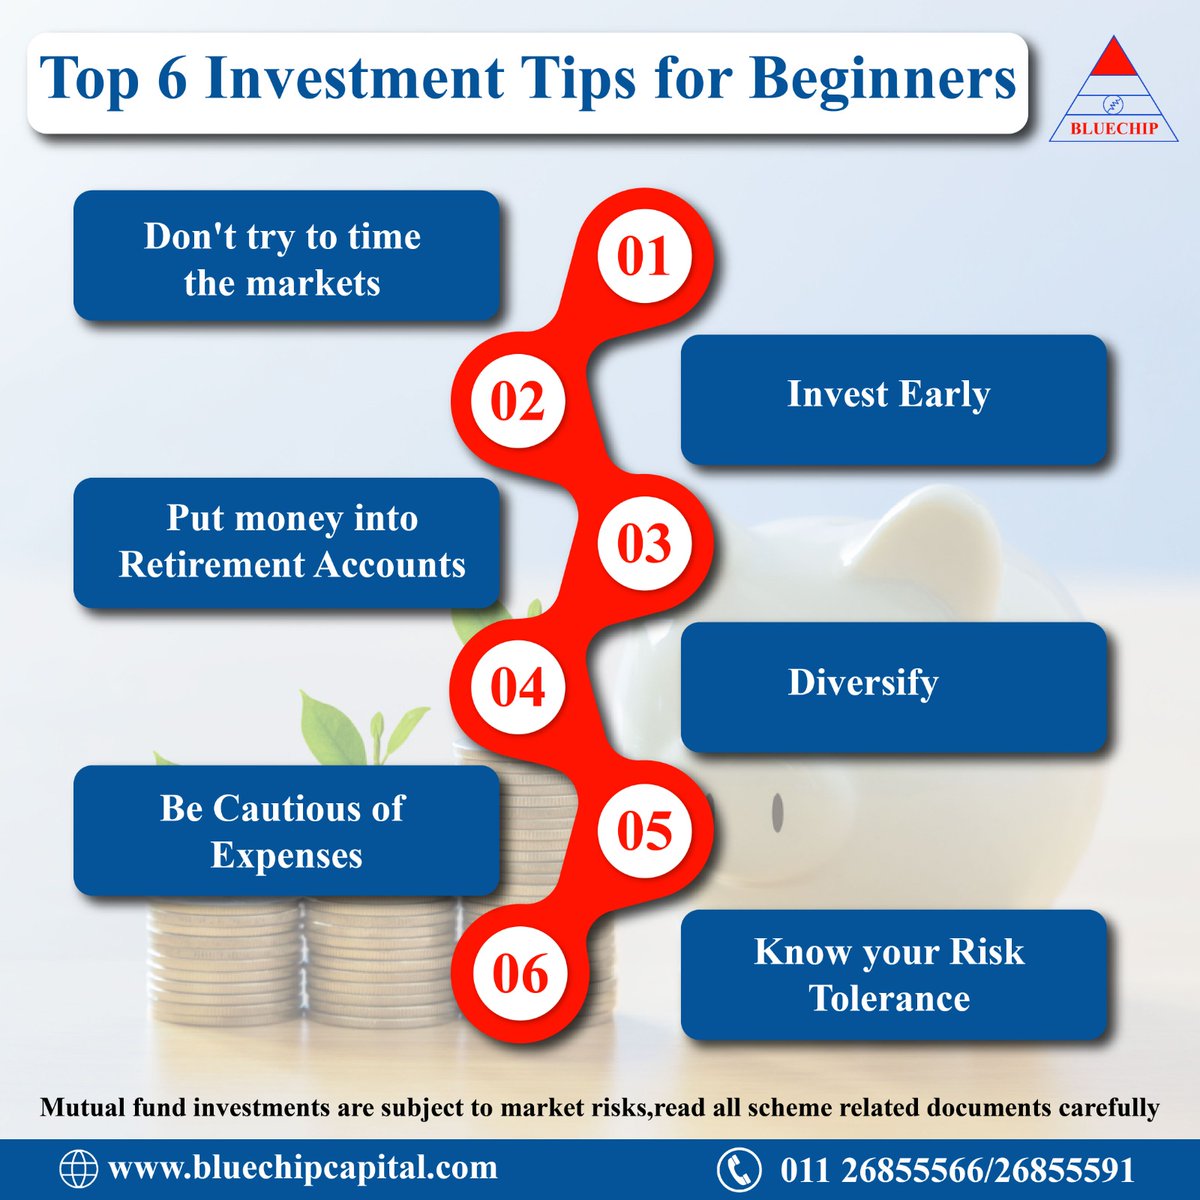 Top 6 investment tips for beginners....
.
.
Call us today for details information
☎ 011 – 26855566 / 26967686
.
.
#bluechipcapital #MutualFunds #mutualfundssahihai #SIP #bluechipcapital #MutualFund #investment #taxsavings #beginners #conveniencia #longterm #financialgoal